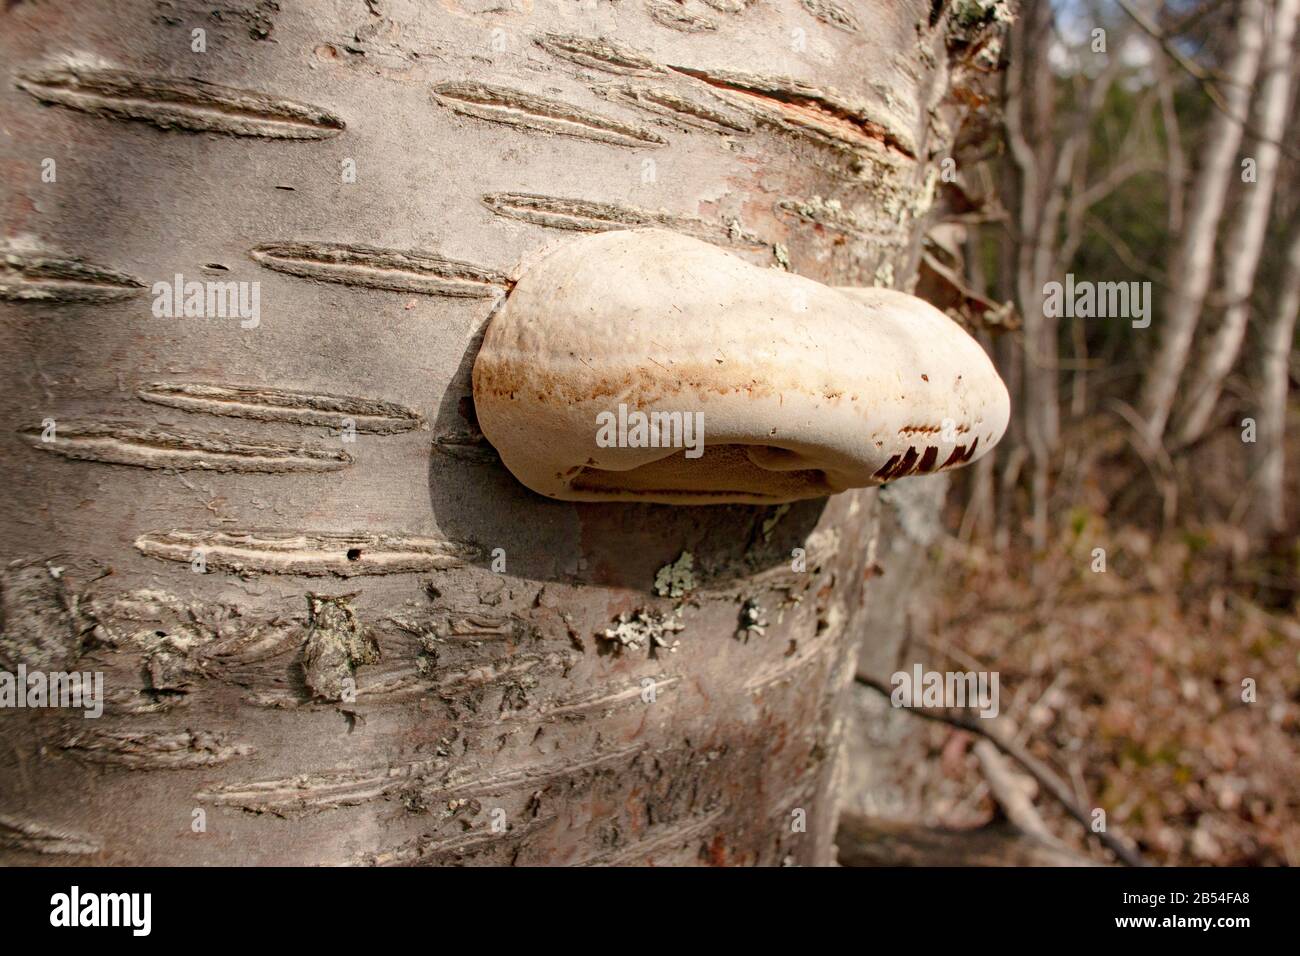 A young Tinder Conk mushroom, Fomes fomentarius, growing on a dead red birch tree, Betula occidentalis, along Callahan Creek, in Troy, Montana. Stock Photo